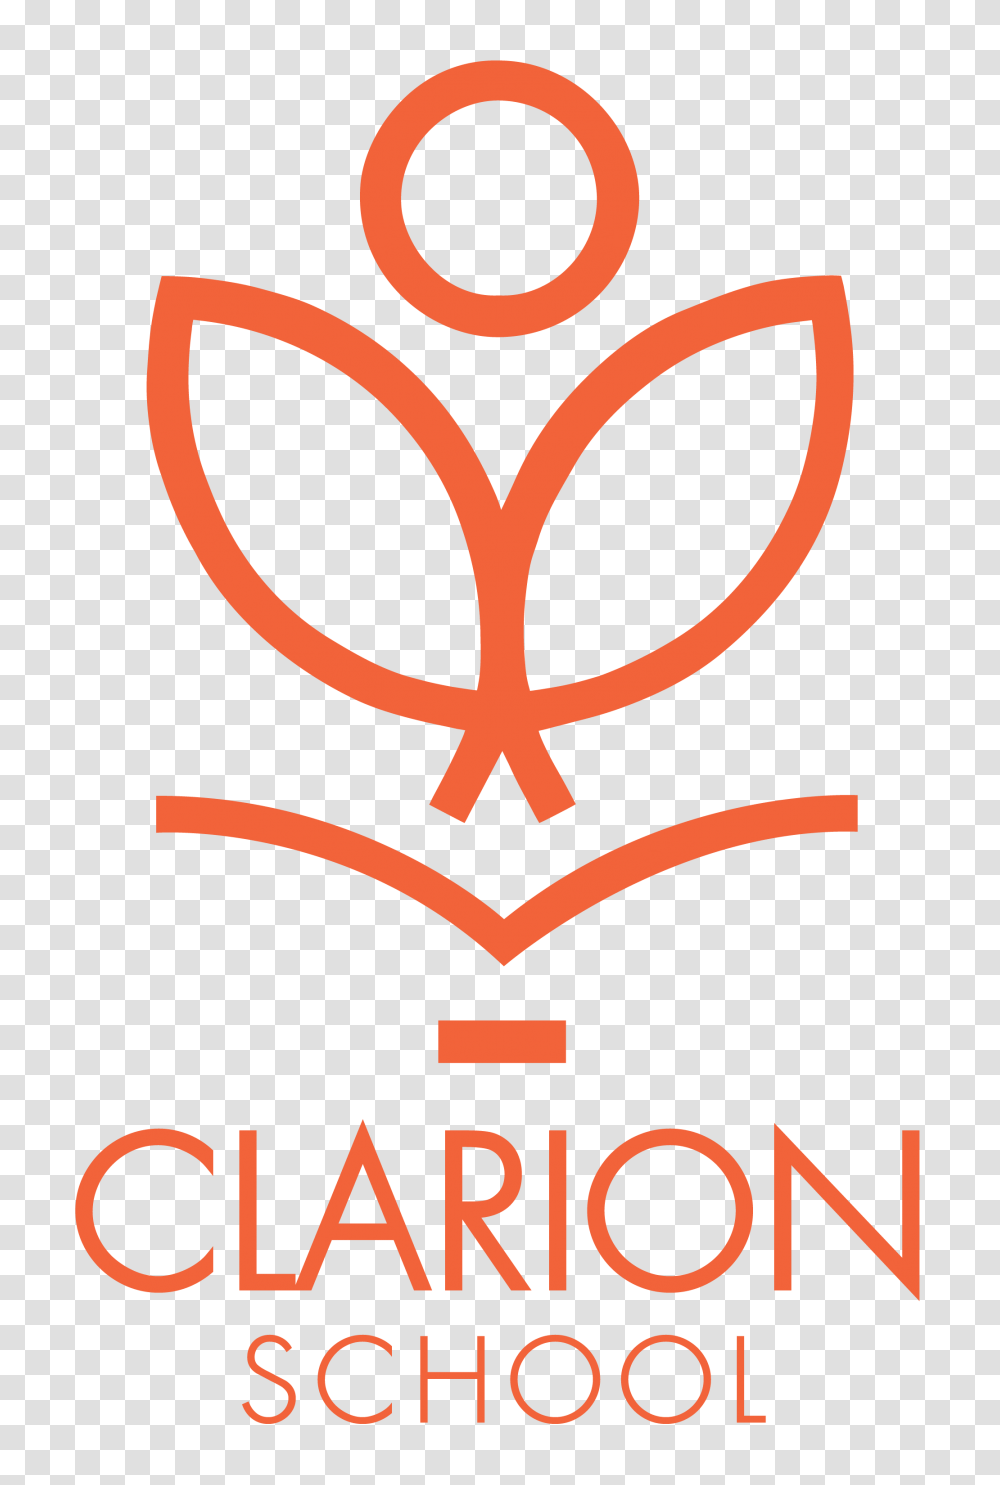 Clarion School Closed Text, Dynamite, Bomb, Weapon, Weaponry Transparent Png